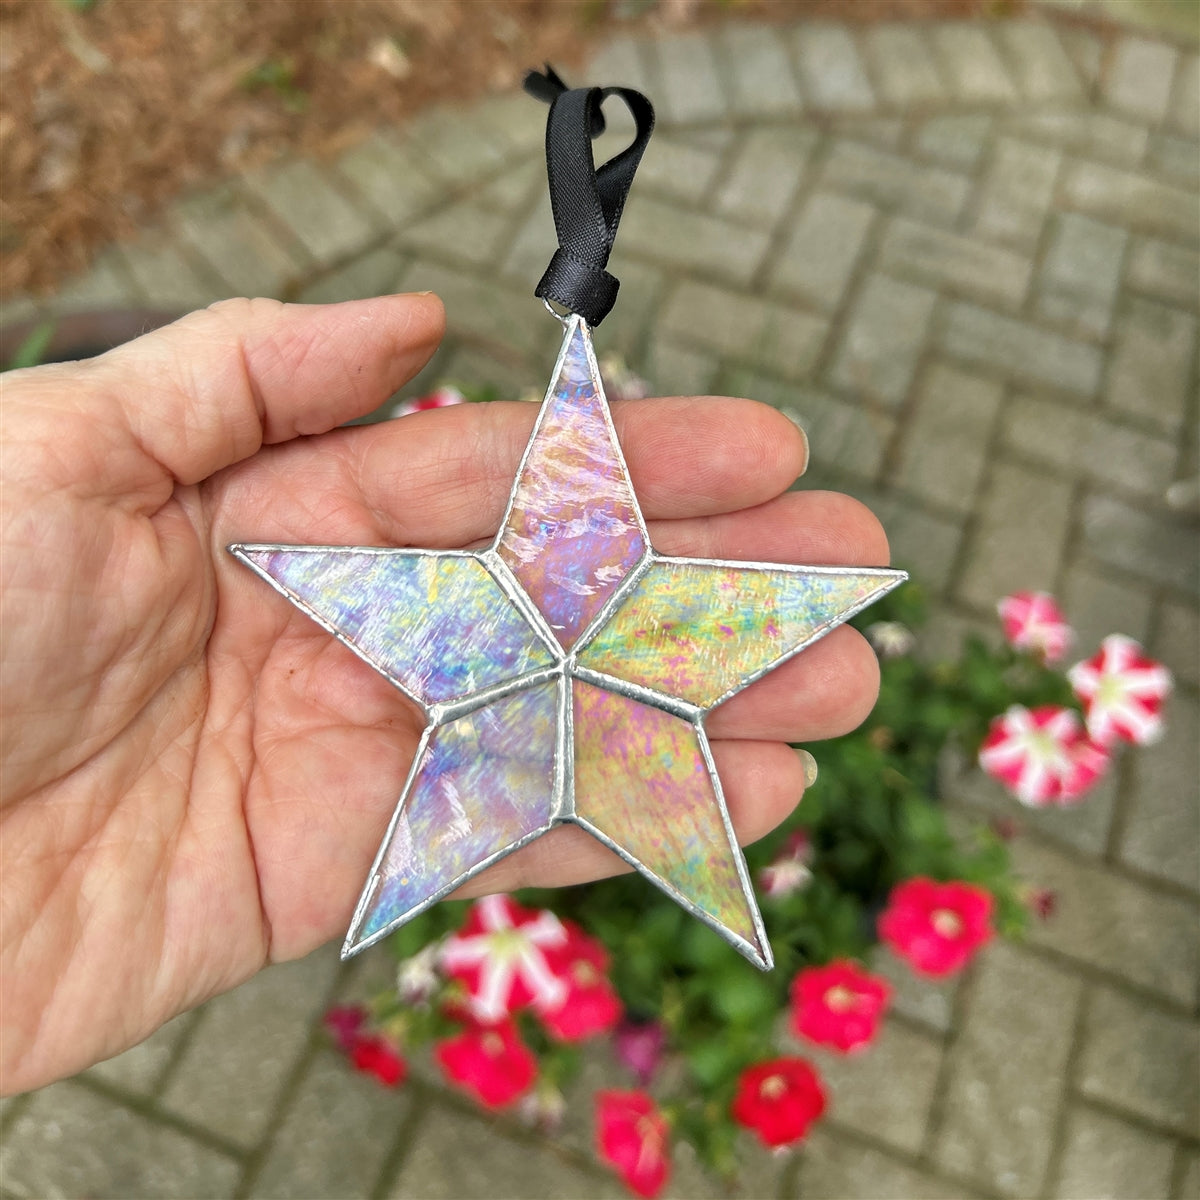 Christian God Shines: Thank You Stained Glass Star